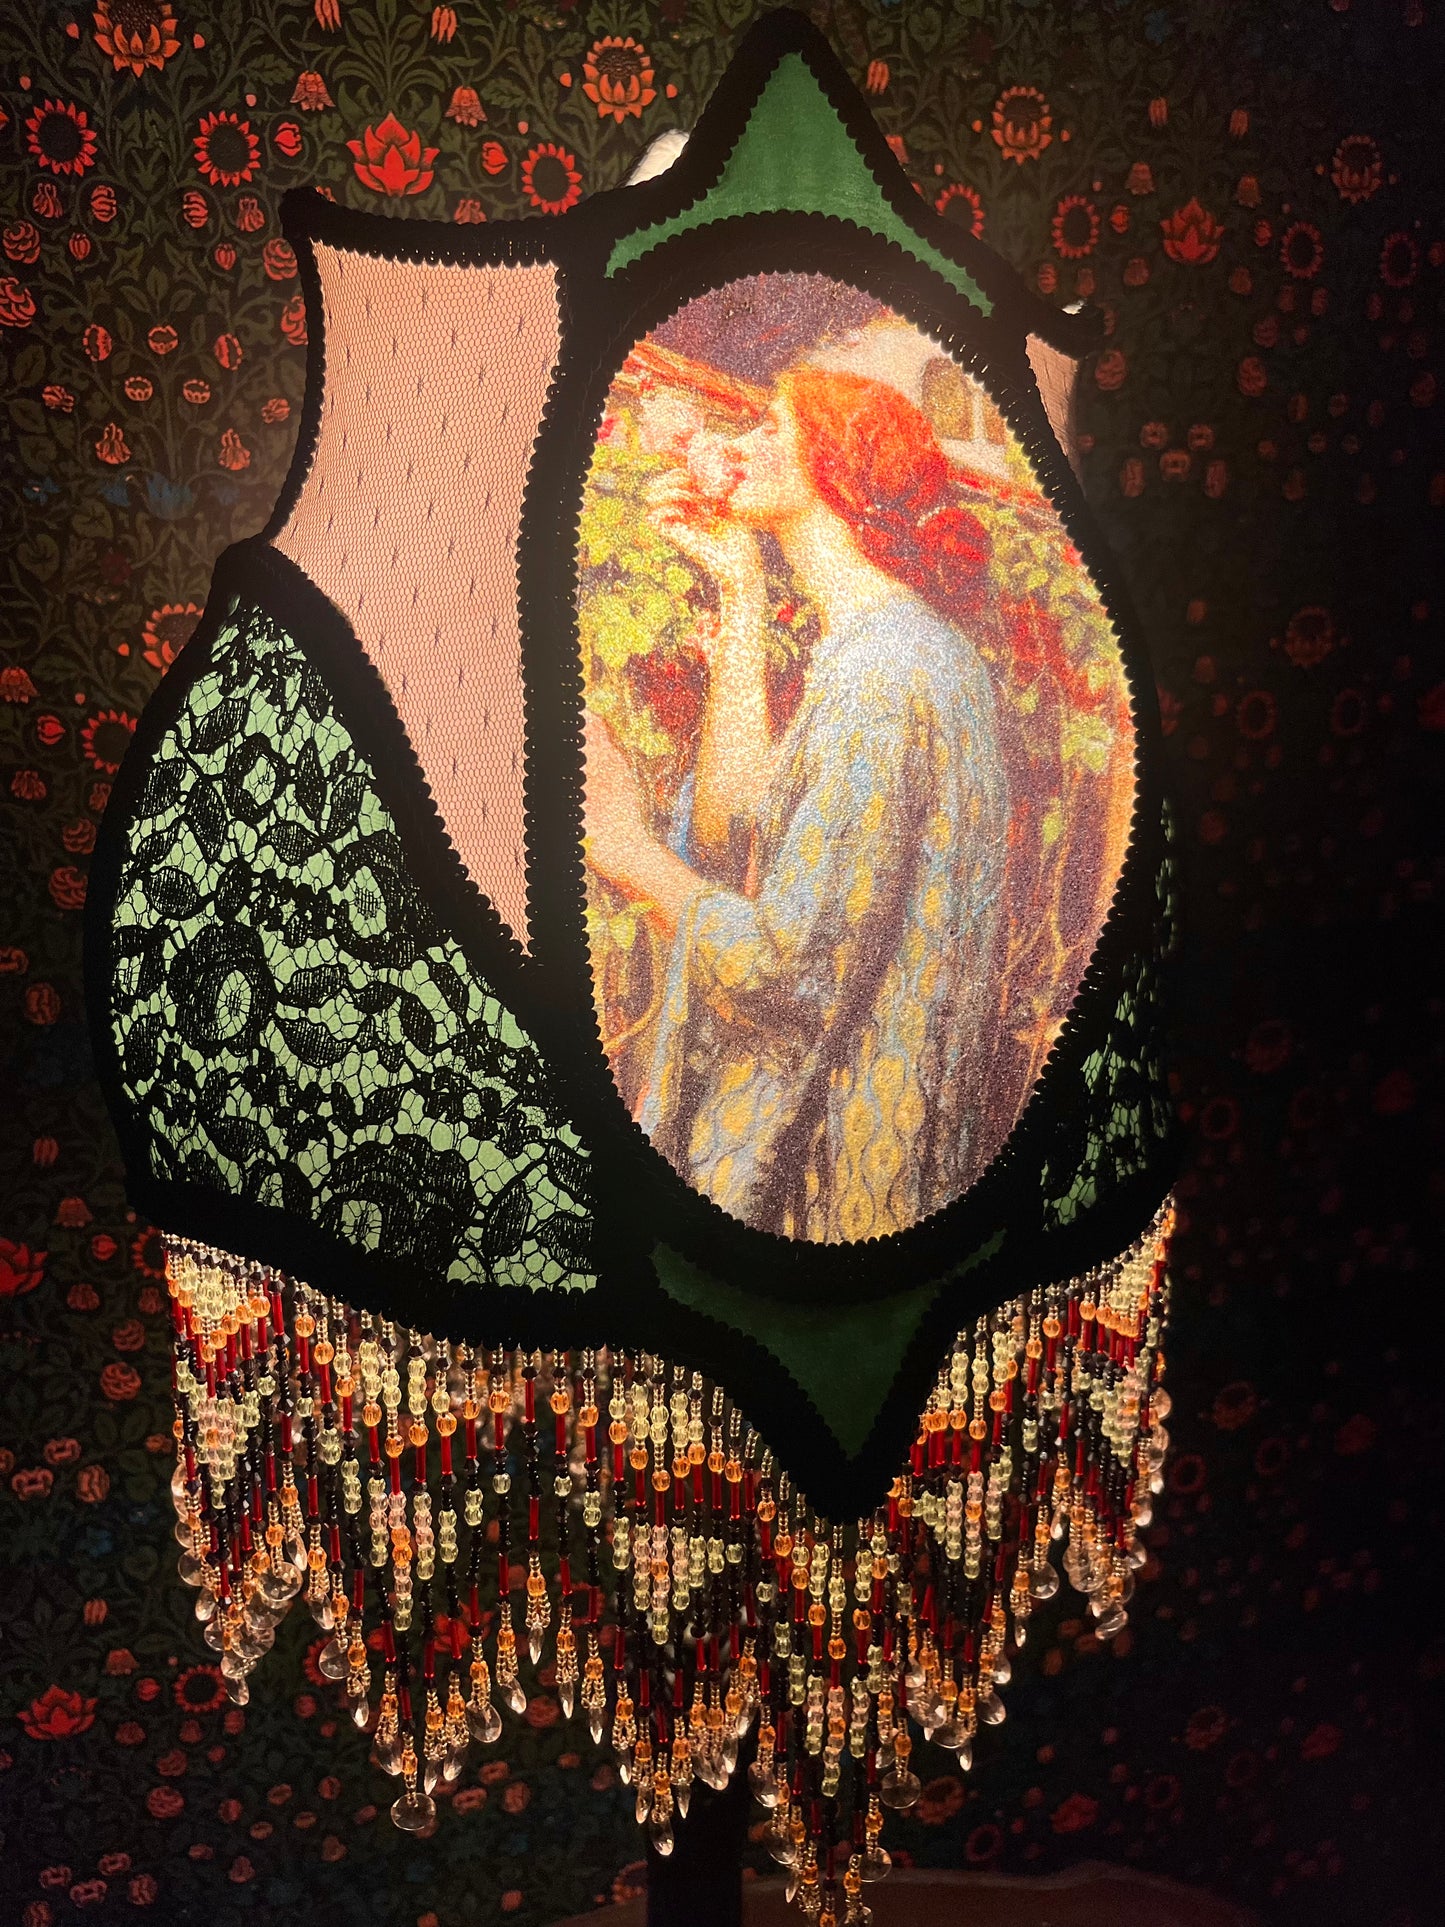 "The Soul of the Rose" Pre-Raphaelite Lampshade